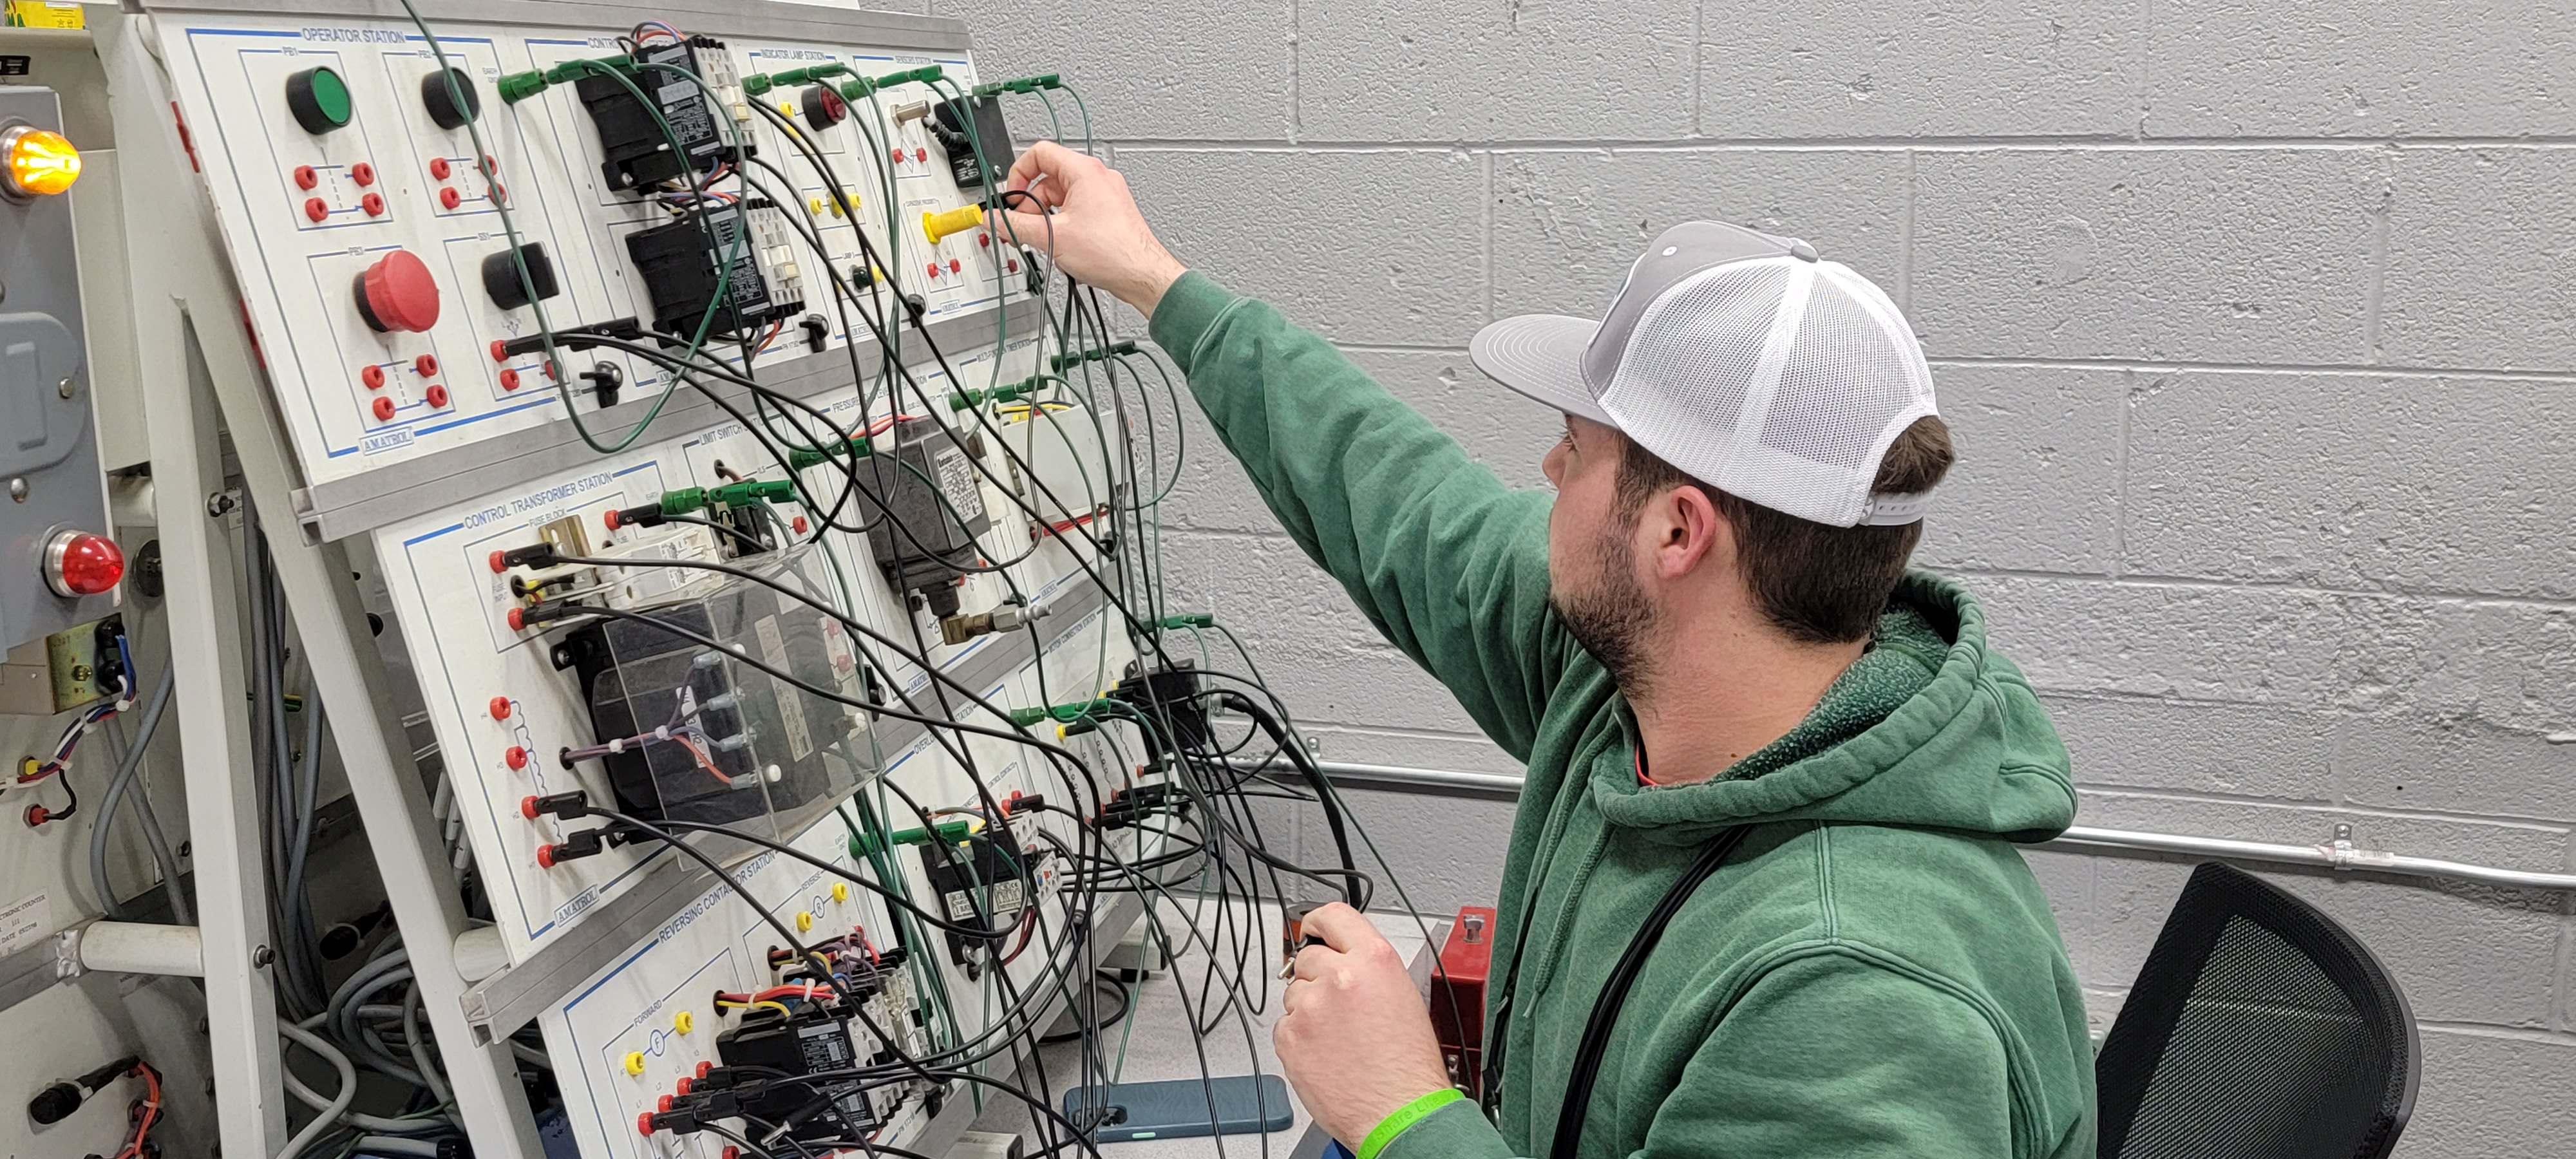 Automation and Electrical Technology student working on electrical grid board